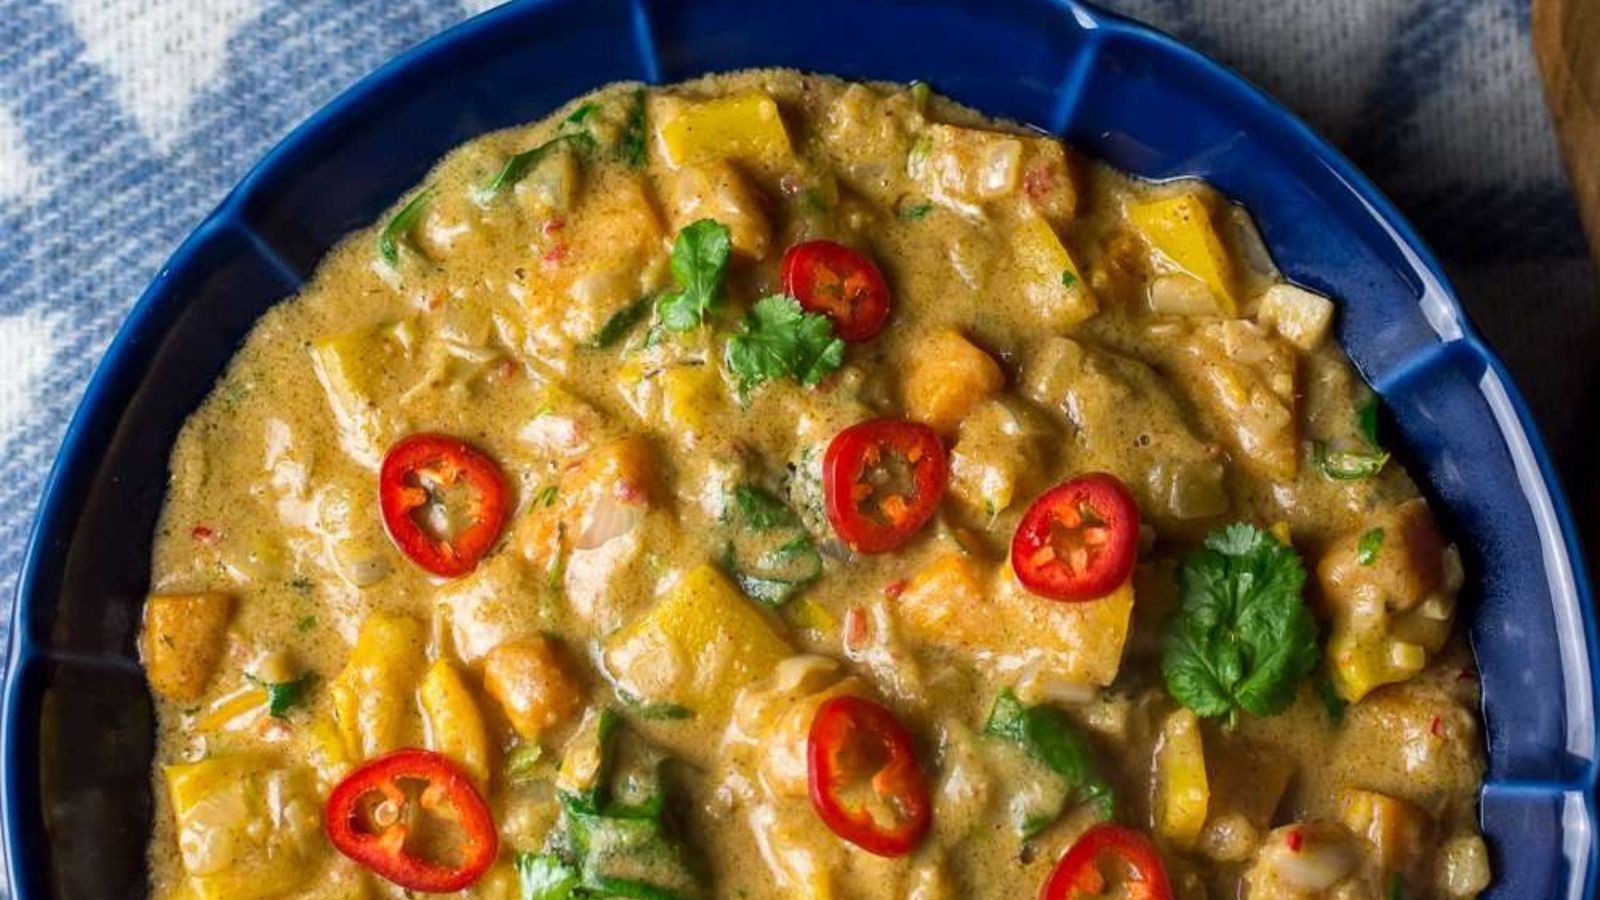 <p>A recipe for peanut butter lovers! But this time, it’s not a sweet treat! It is our favourite West African Peanut Stew. We cooked butternut squash, pepper and spinach in spiced peanut butter stock to create a rich, creamy and satisfying stew for cold winter evenings!</p><p><strong>Find All Stew Recipes here: </strong><a href="https://mypureplants.com/vegan-stews/"><strong>stew recipe</strong></a></p>